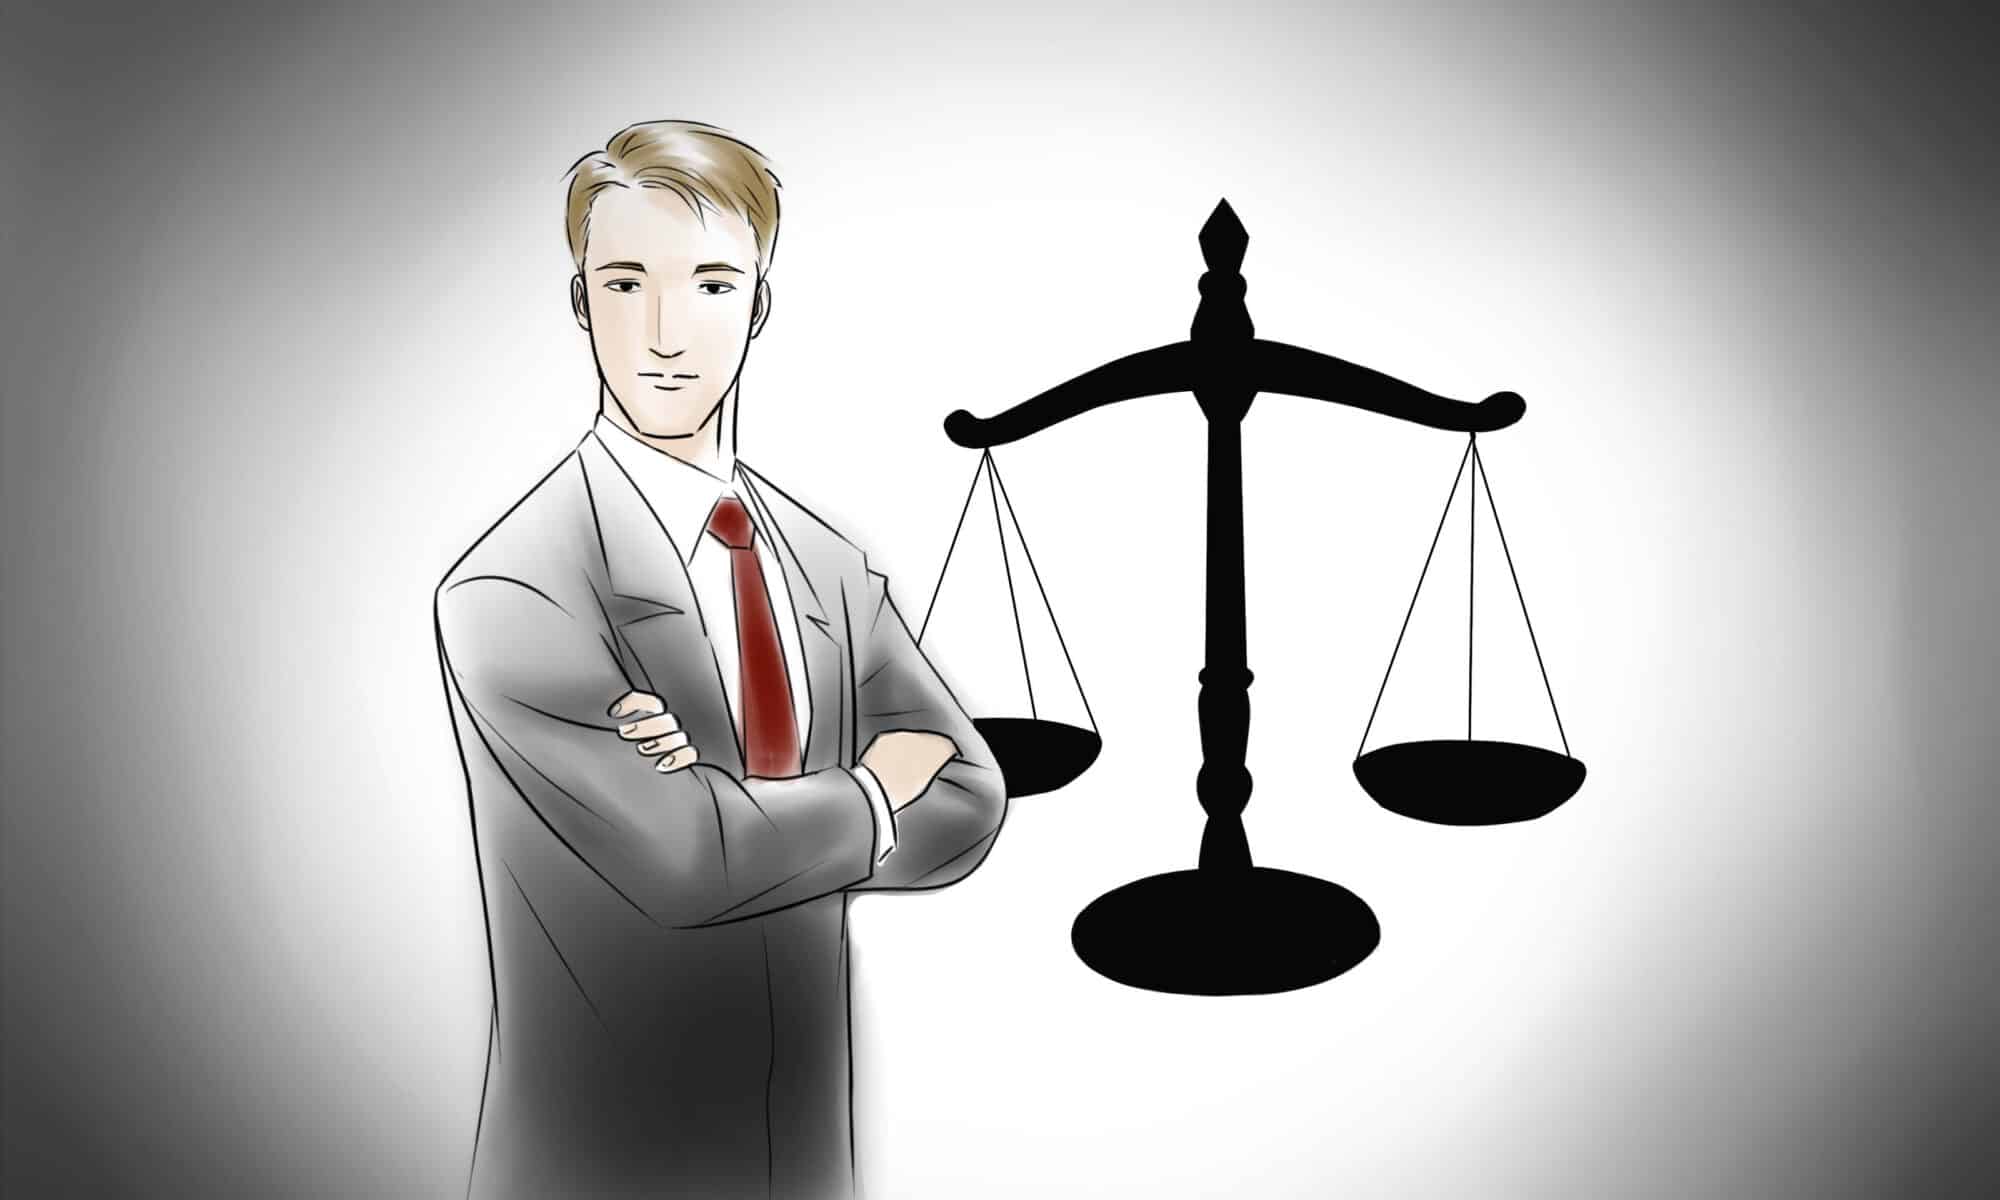 A caricature of a 30 year old male workers' compensation or bankruptcy lawyer in a grey suit with a red tie arms crossed in front of the scales of justice